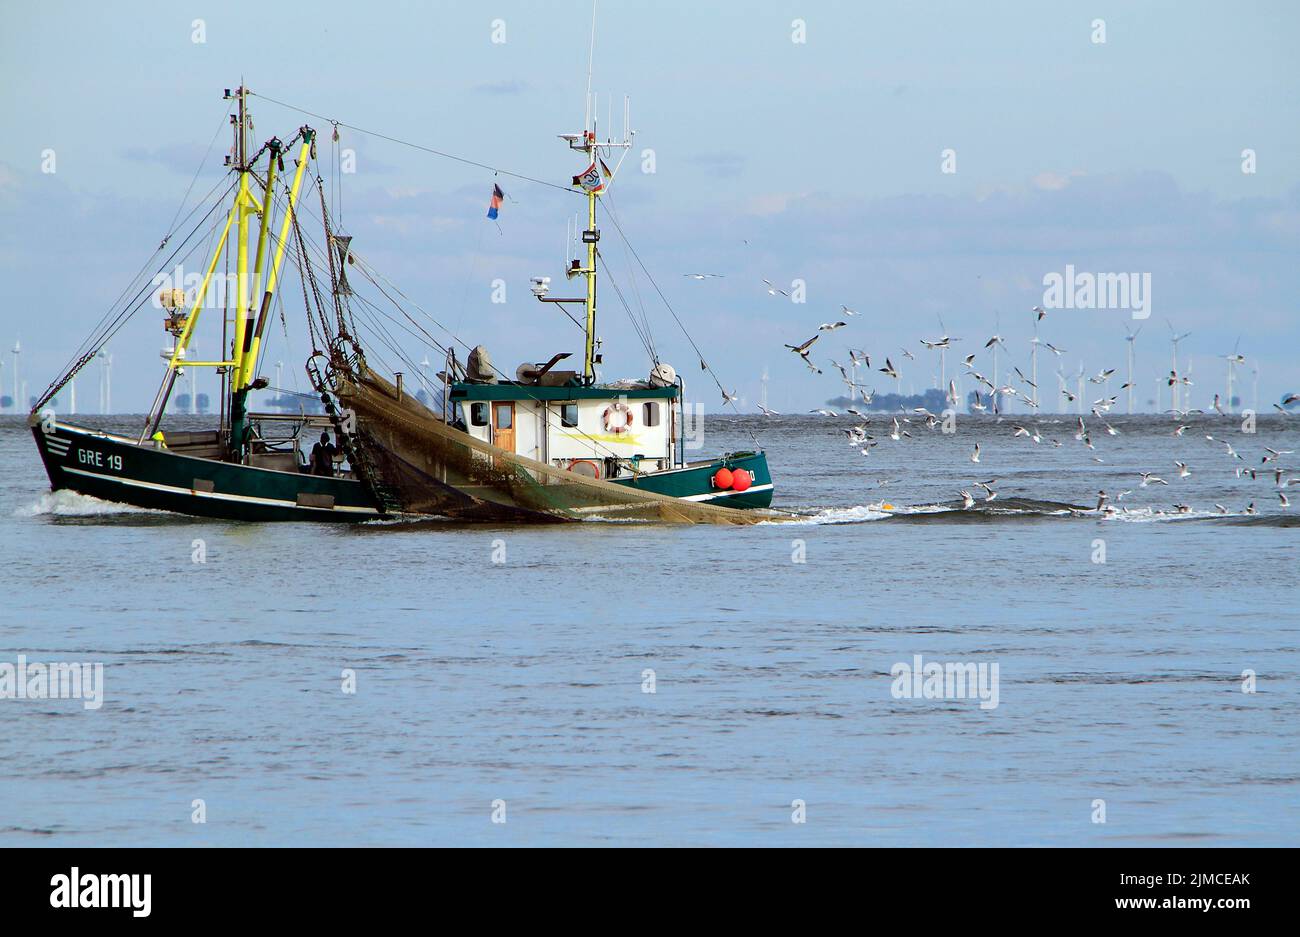 Crab fishermen, Shrimps, North Sea crabs, Cuxhaven, Lower Saxony, Germany, Europe Stock Photo